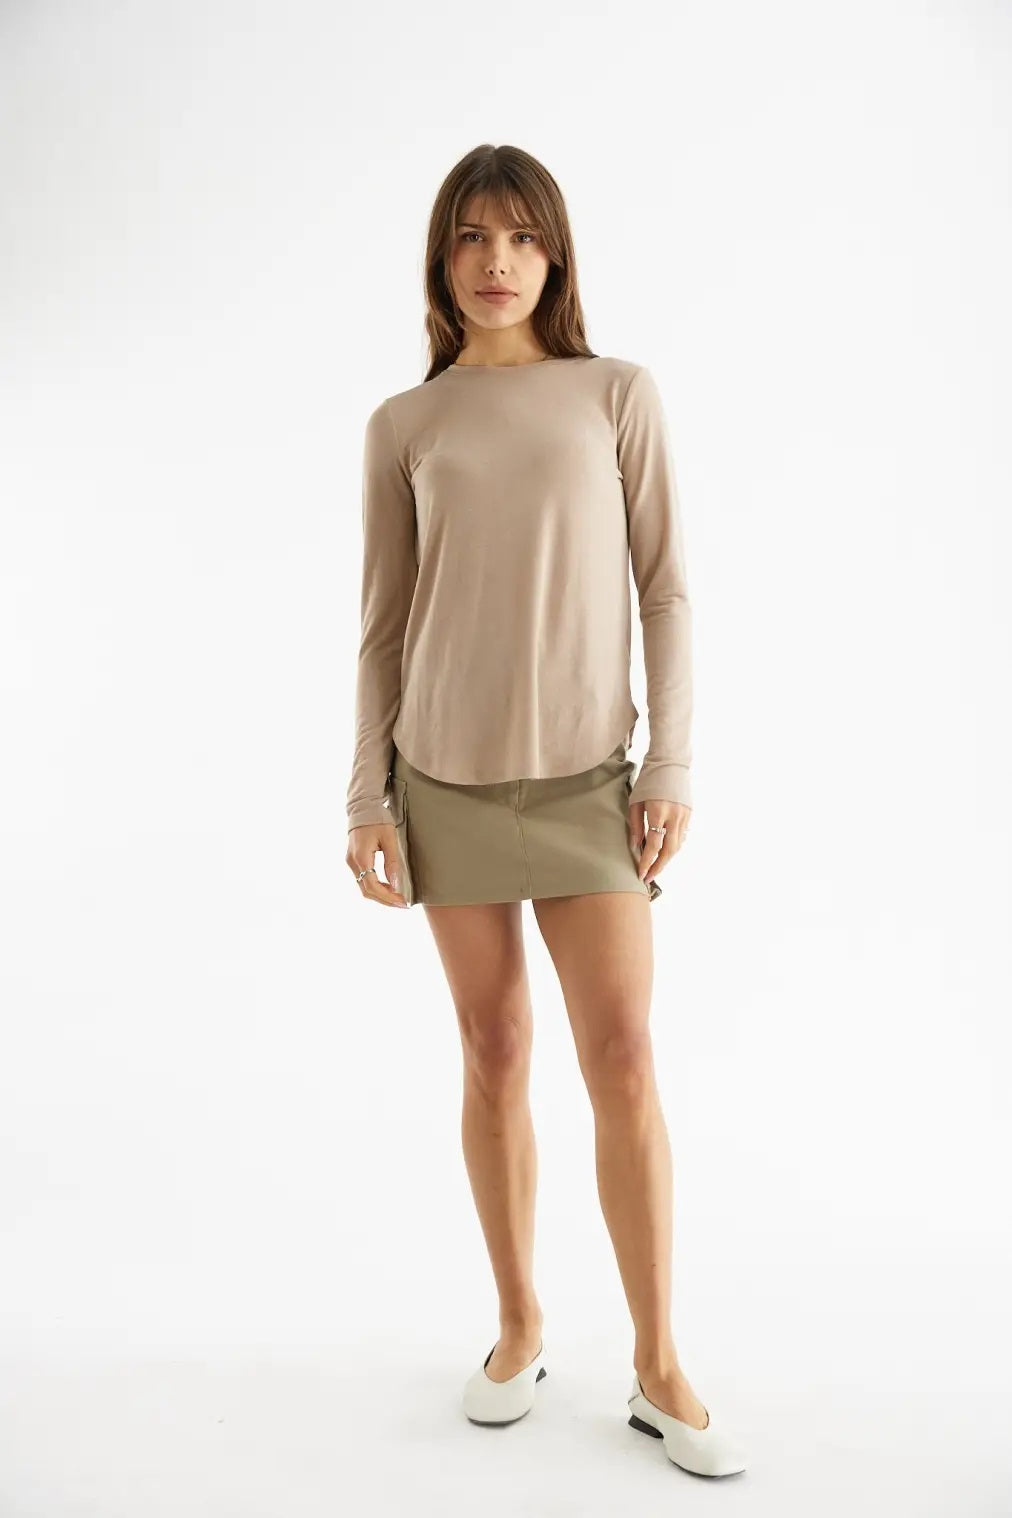 All : Row, The Tami Long Sleeve Top in Beige - Boutique Dandelion